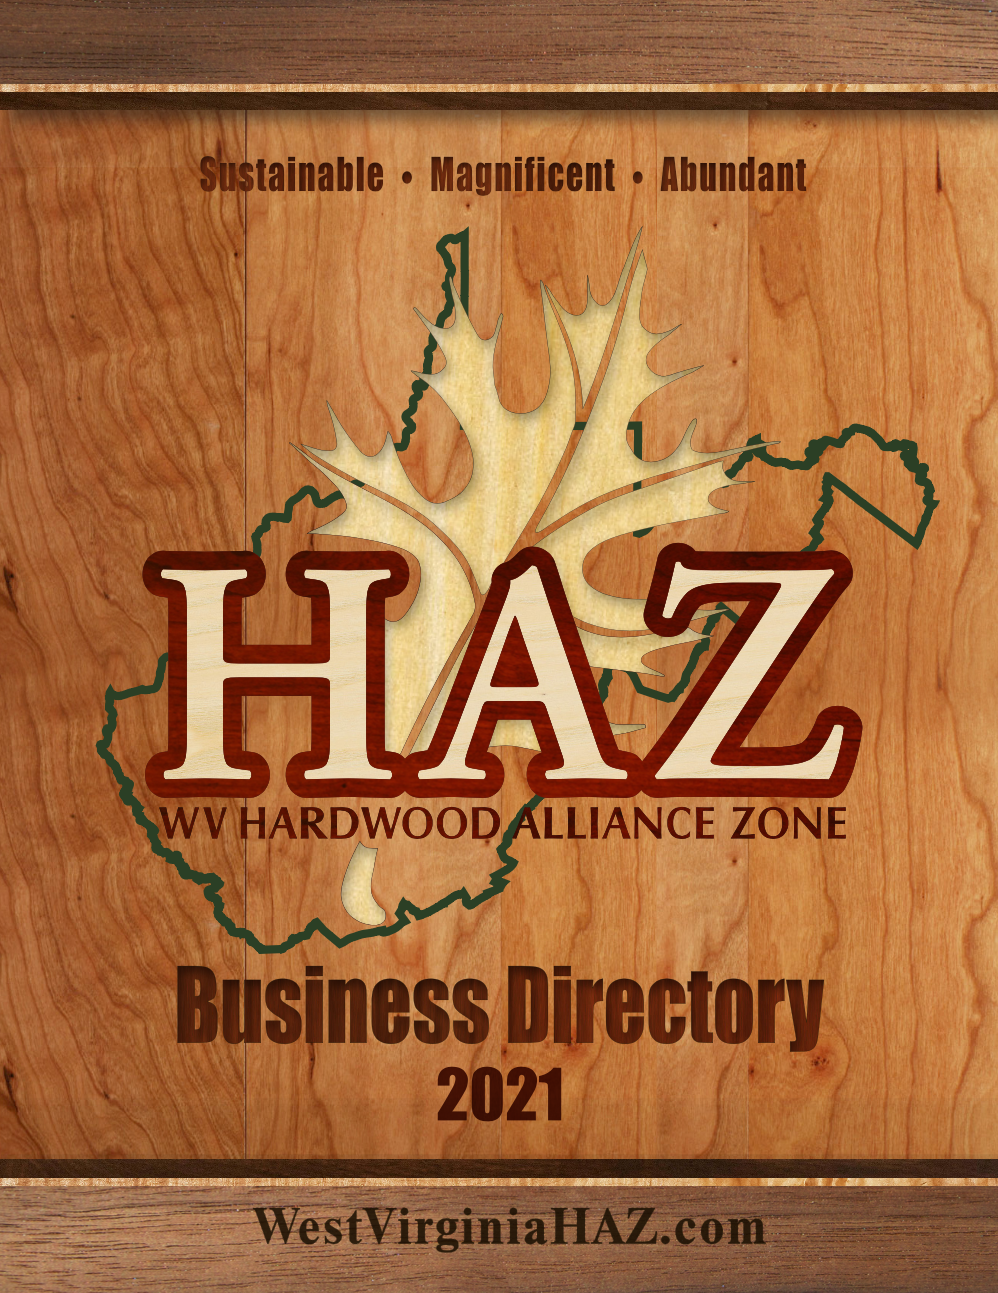 Business Directory 2021